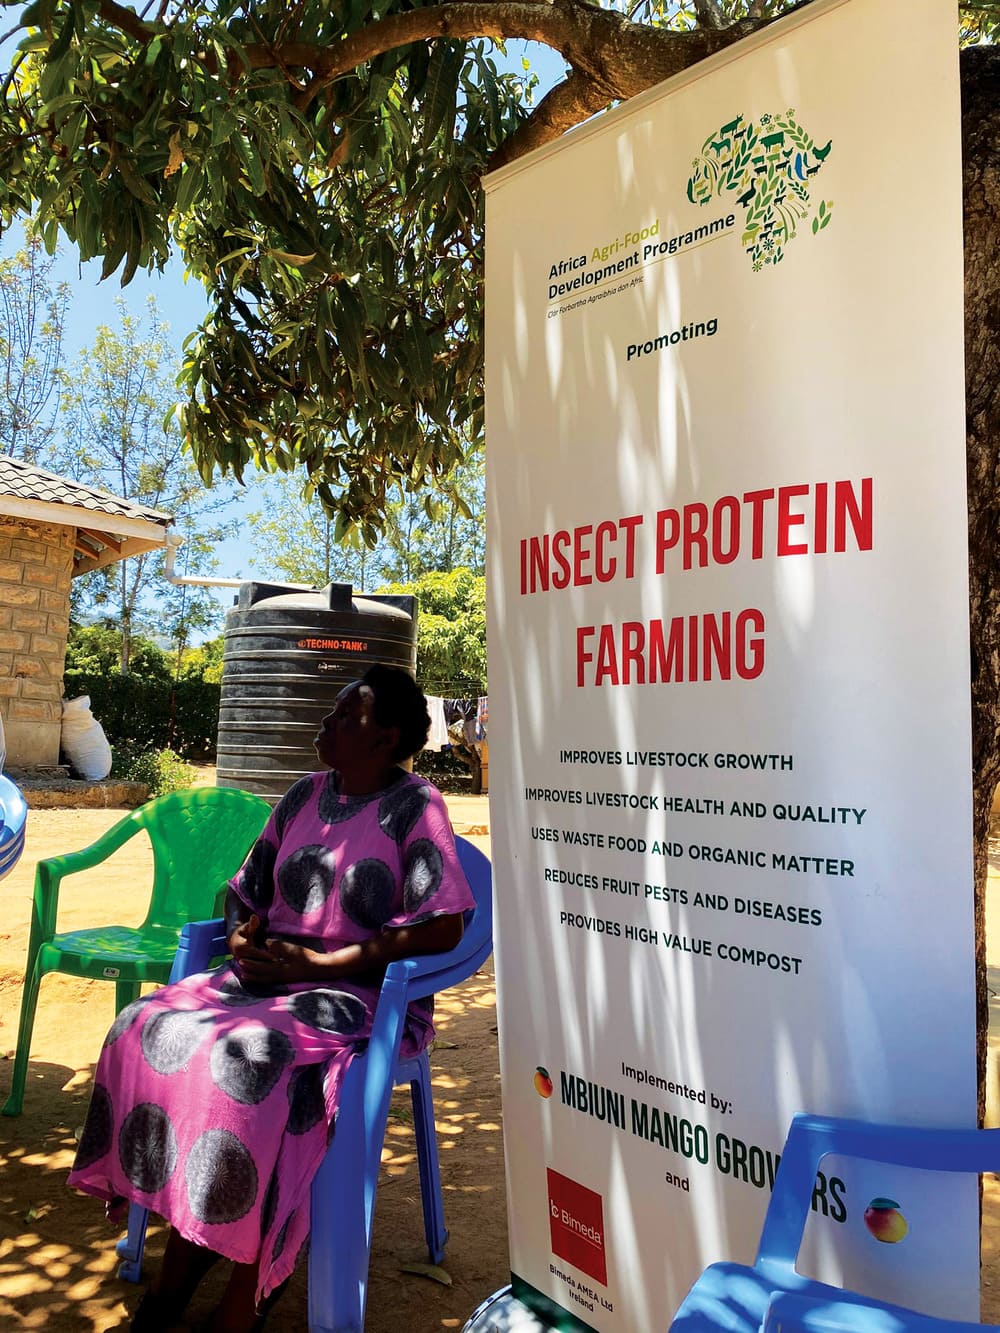 Africa Agri-food - Insect Protein Farming